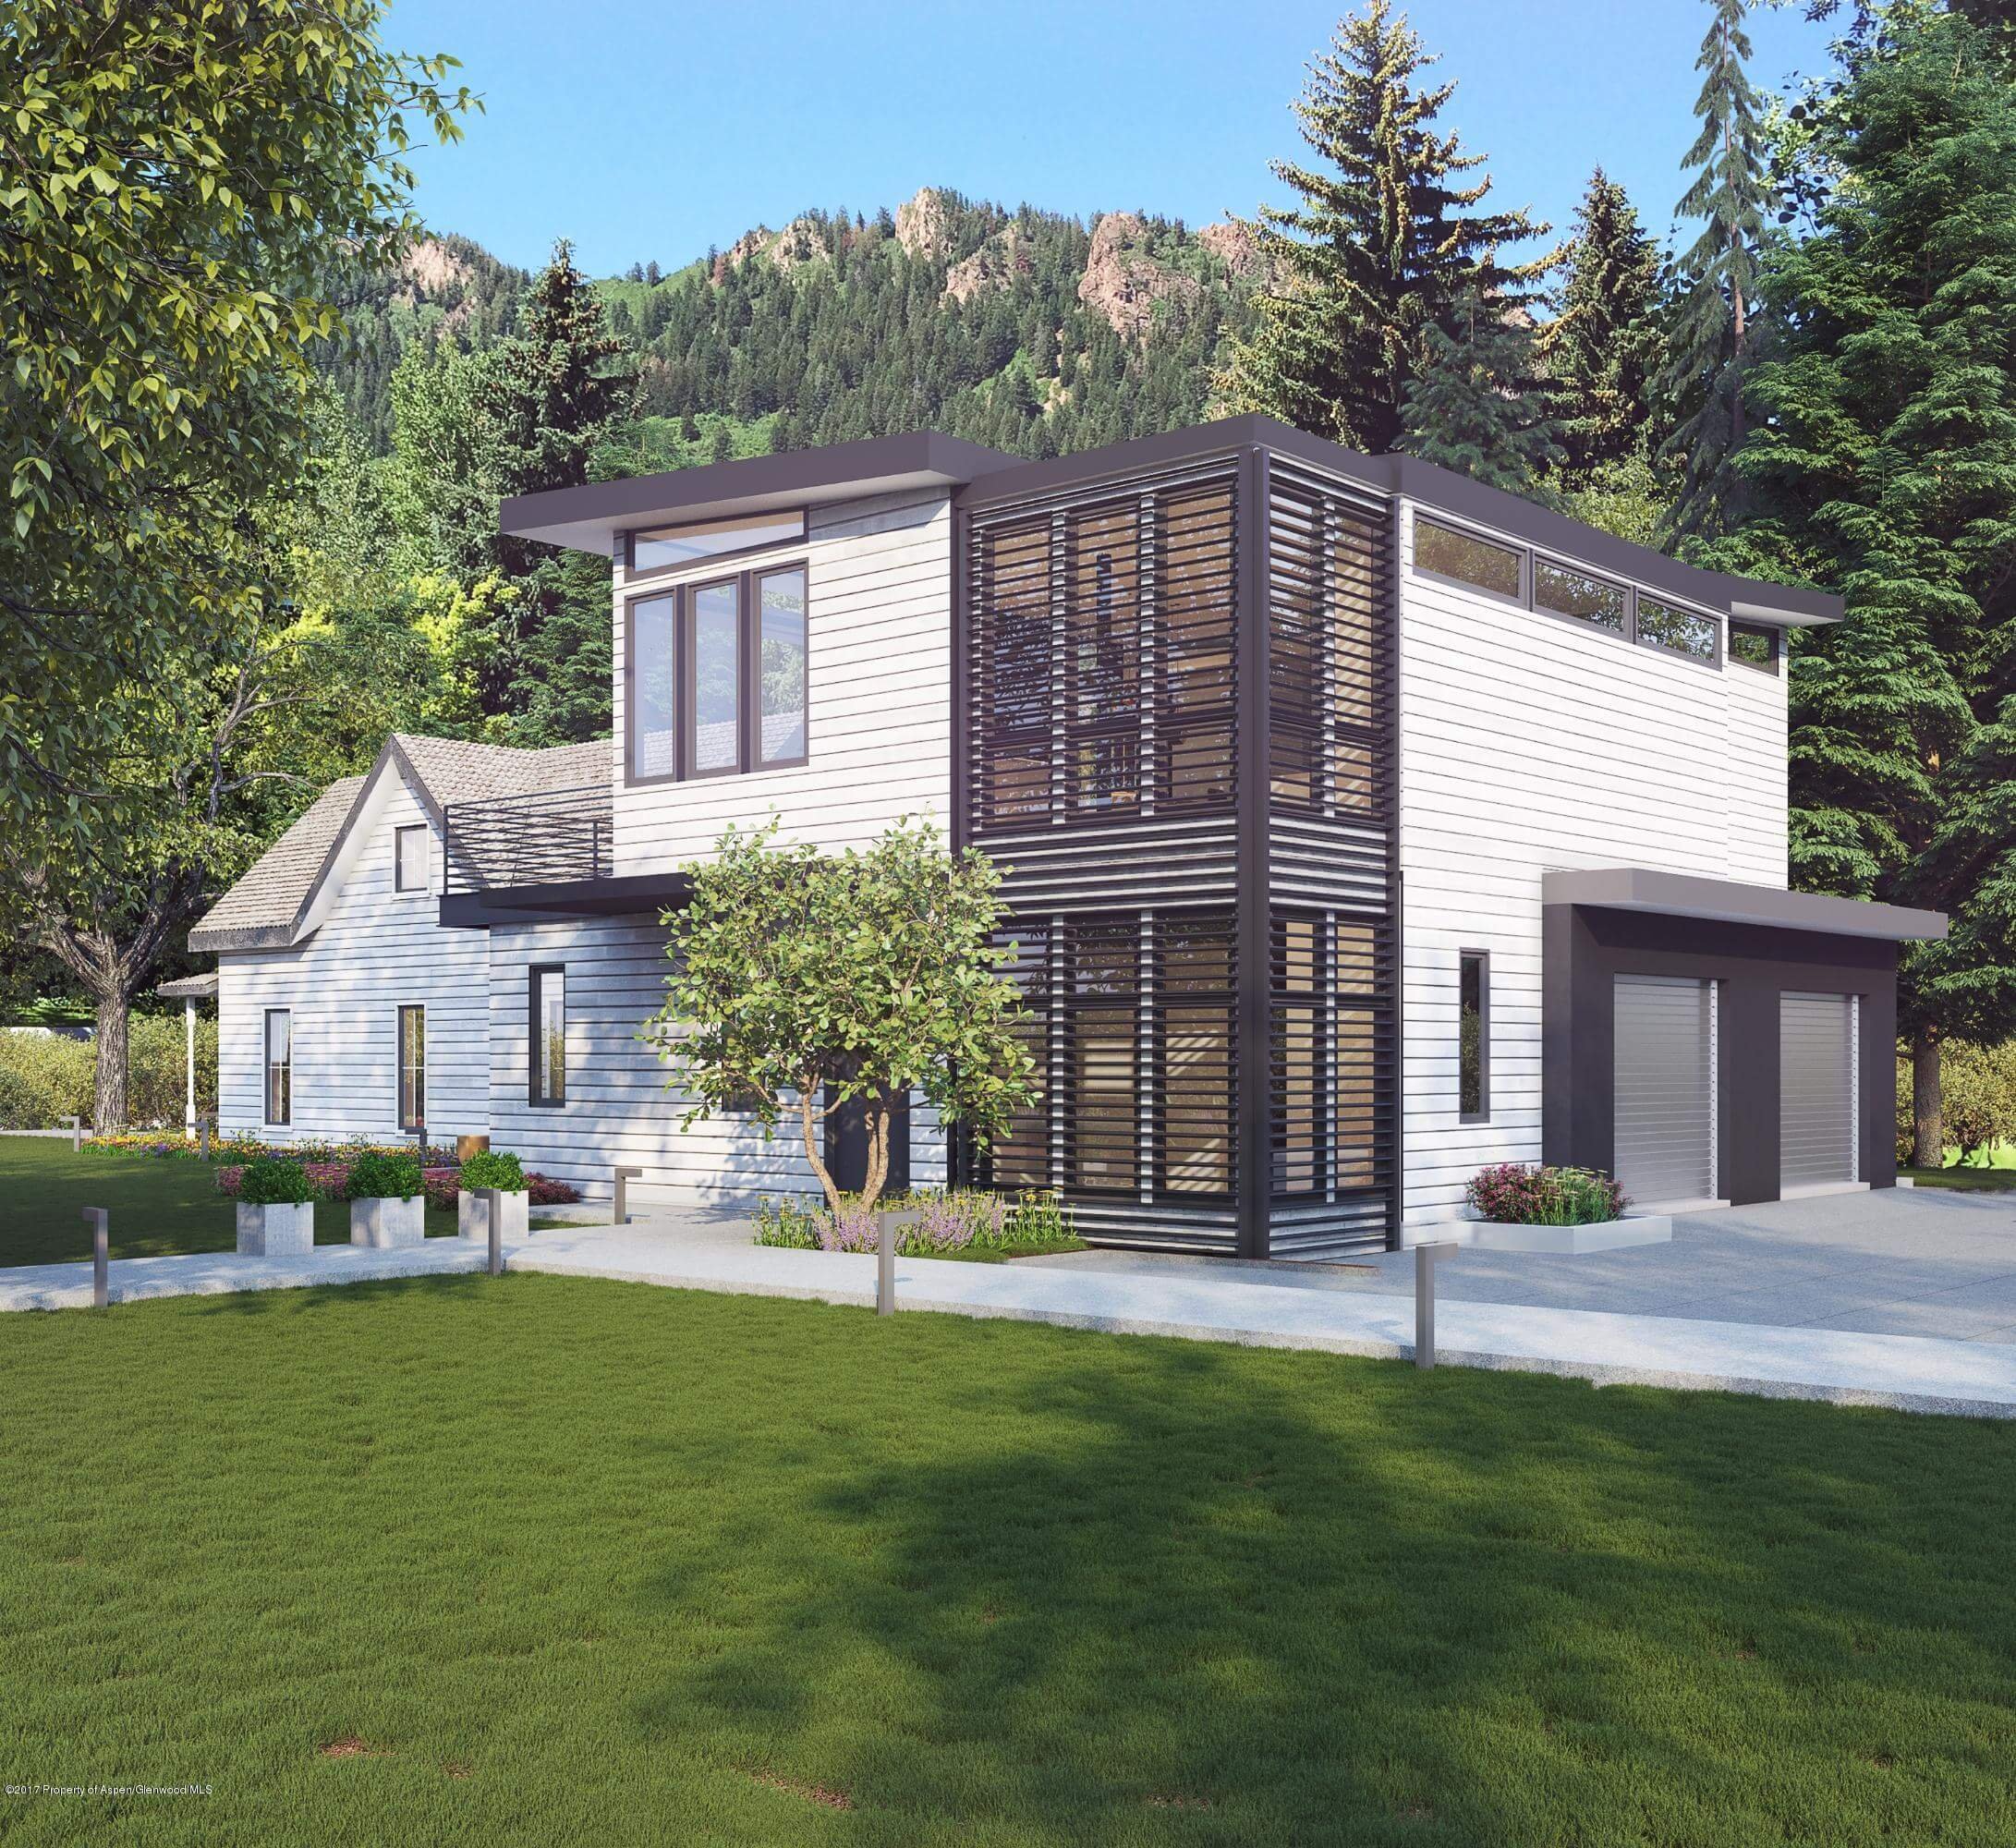 New 203 N Monarch St Aspen Townhome Closes at $8.995M/$2,637 sq ft Unfurnished Image